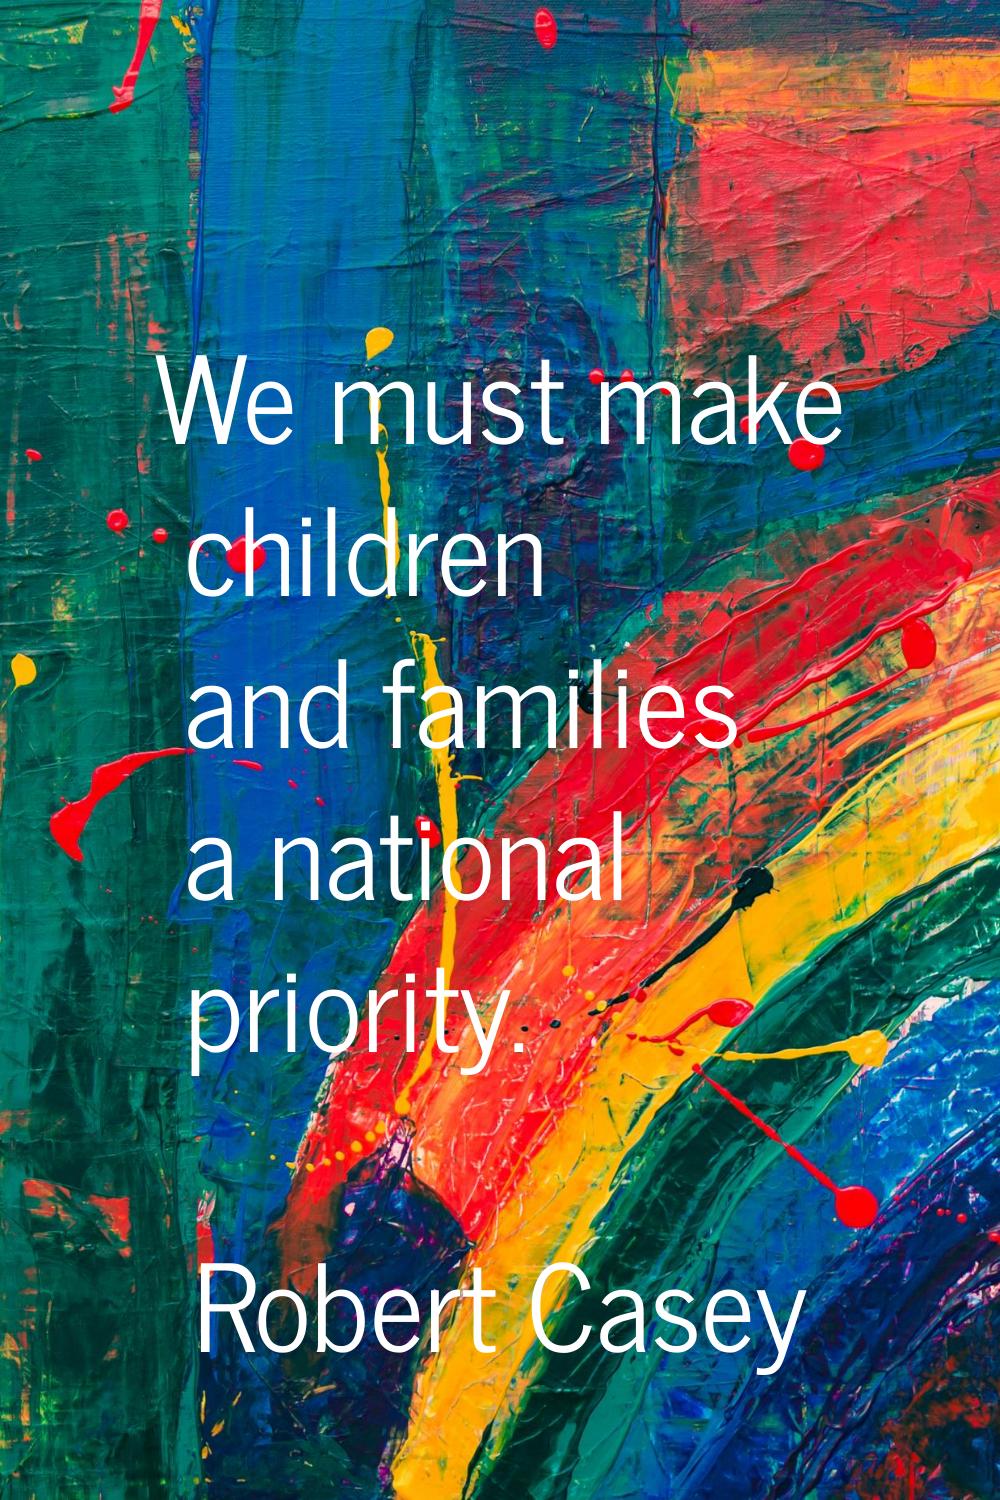 We must make children and families a national priority.